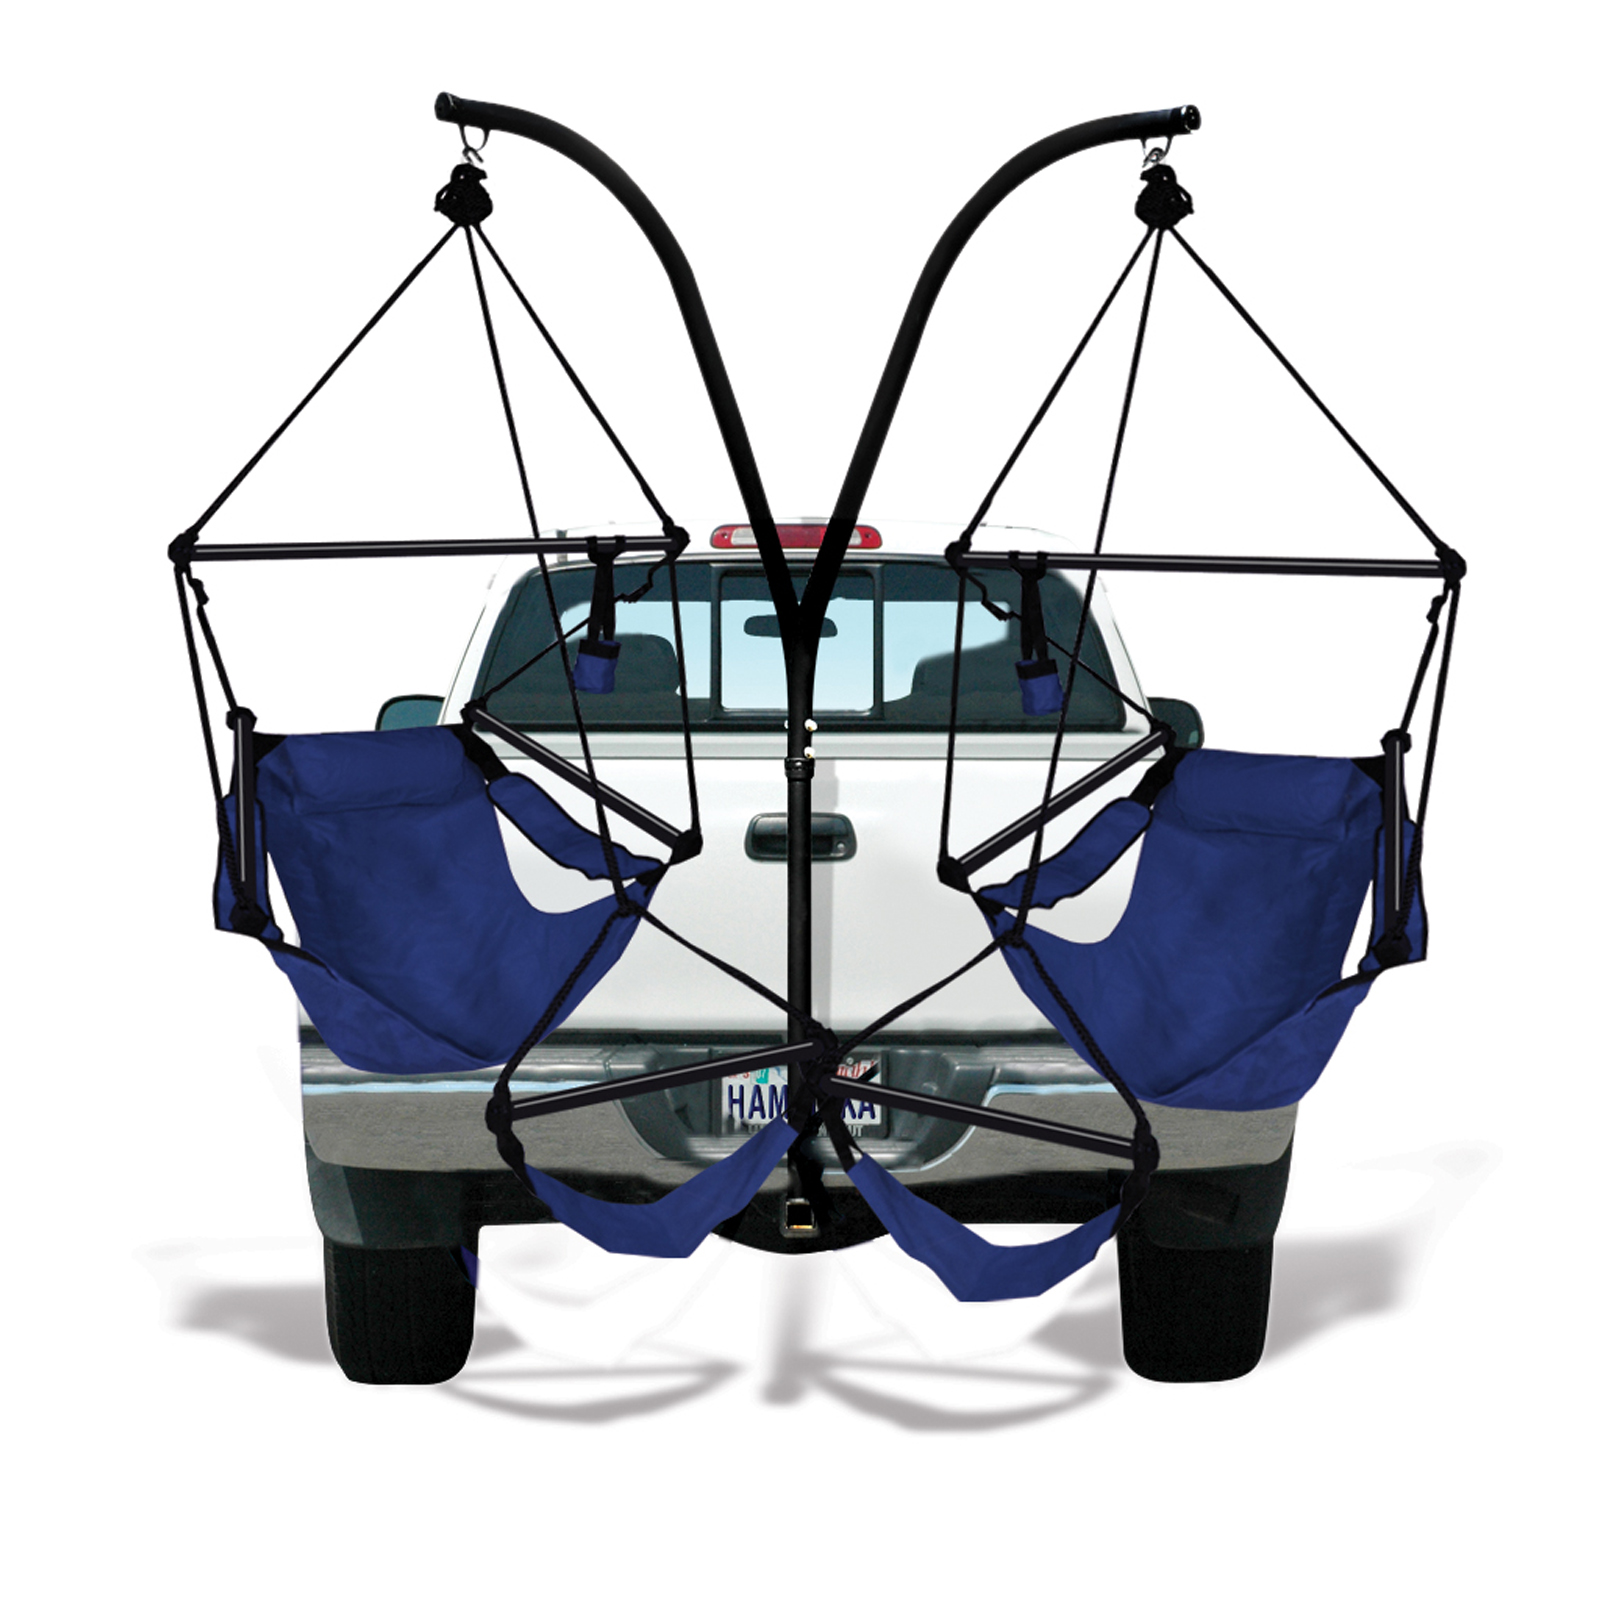 Kings Pond Hammaka Trailer Hitch Stand and Fabric Chairs - Midnight Blue